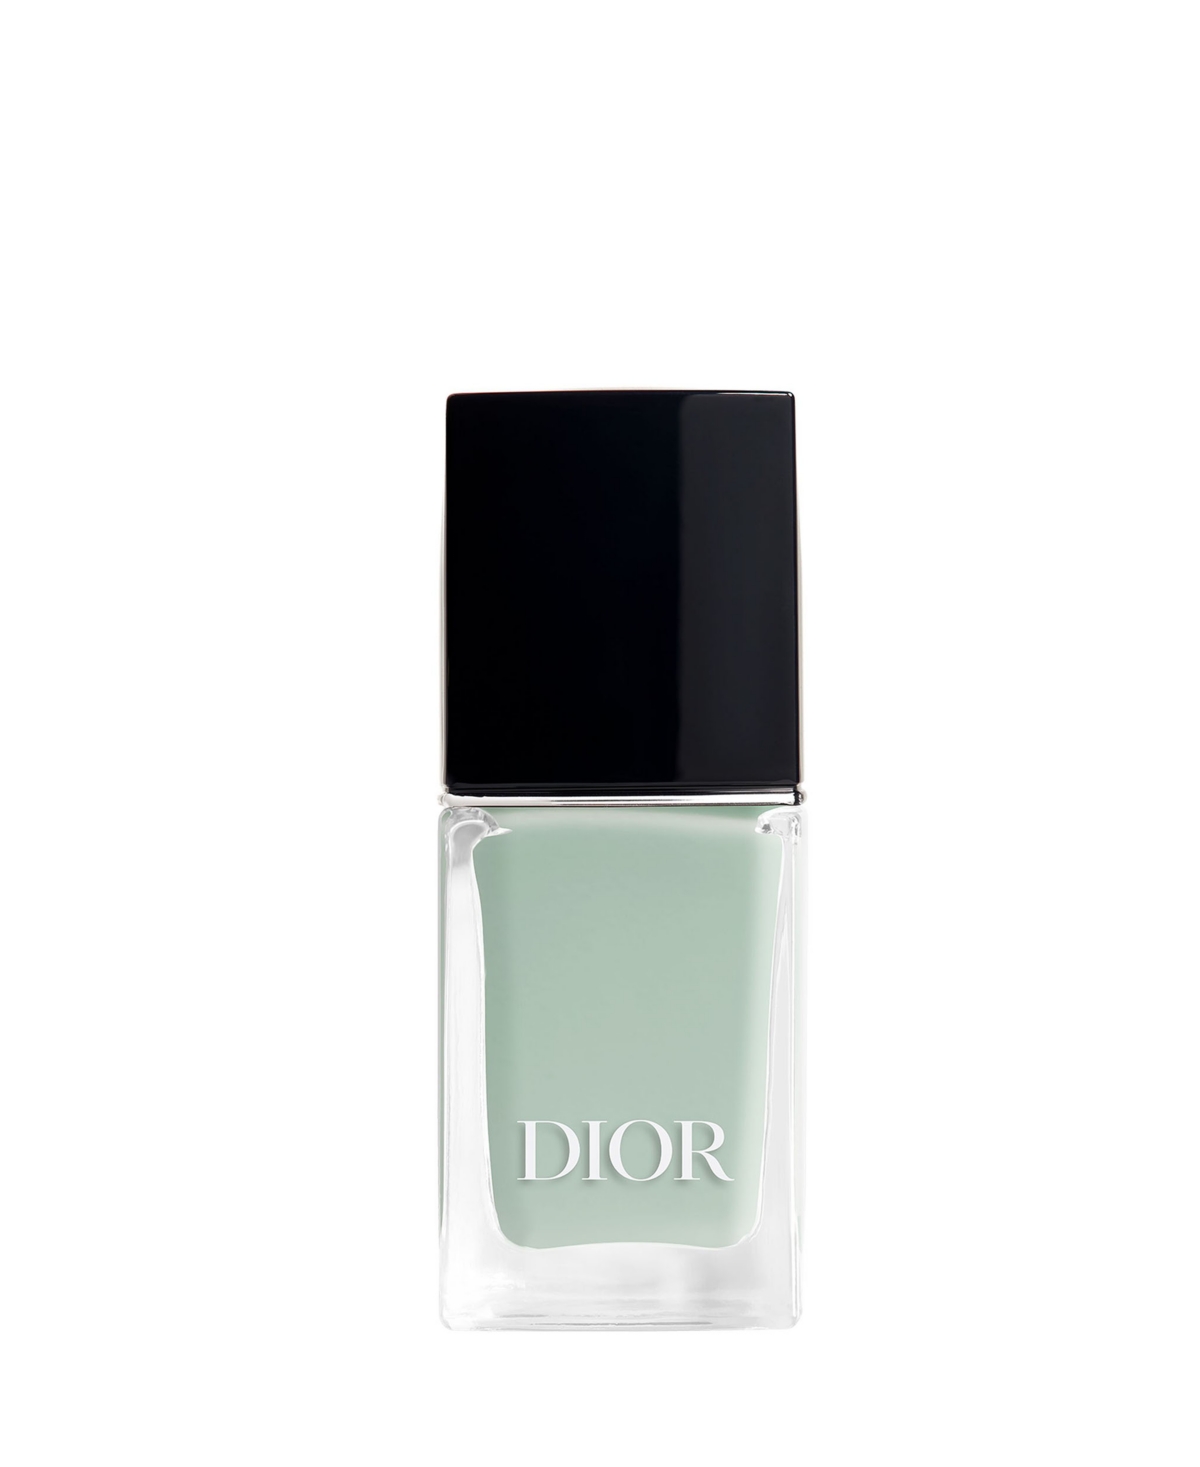 Dior Vernis Nail Polish With Gel Effect & Couture Color In Mint - A Delicate Mint